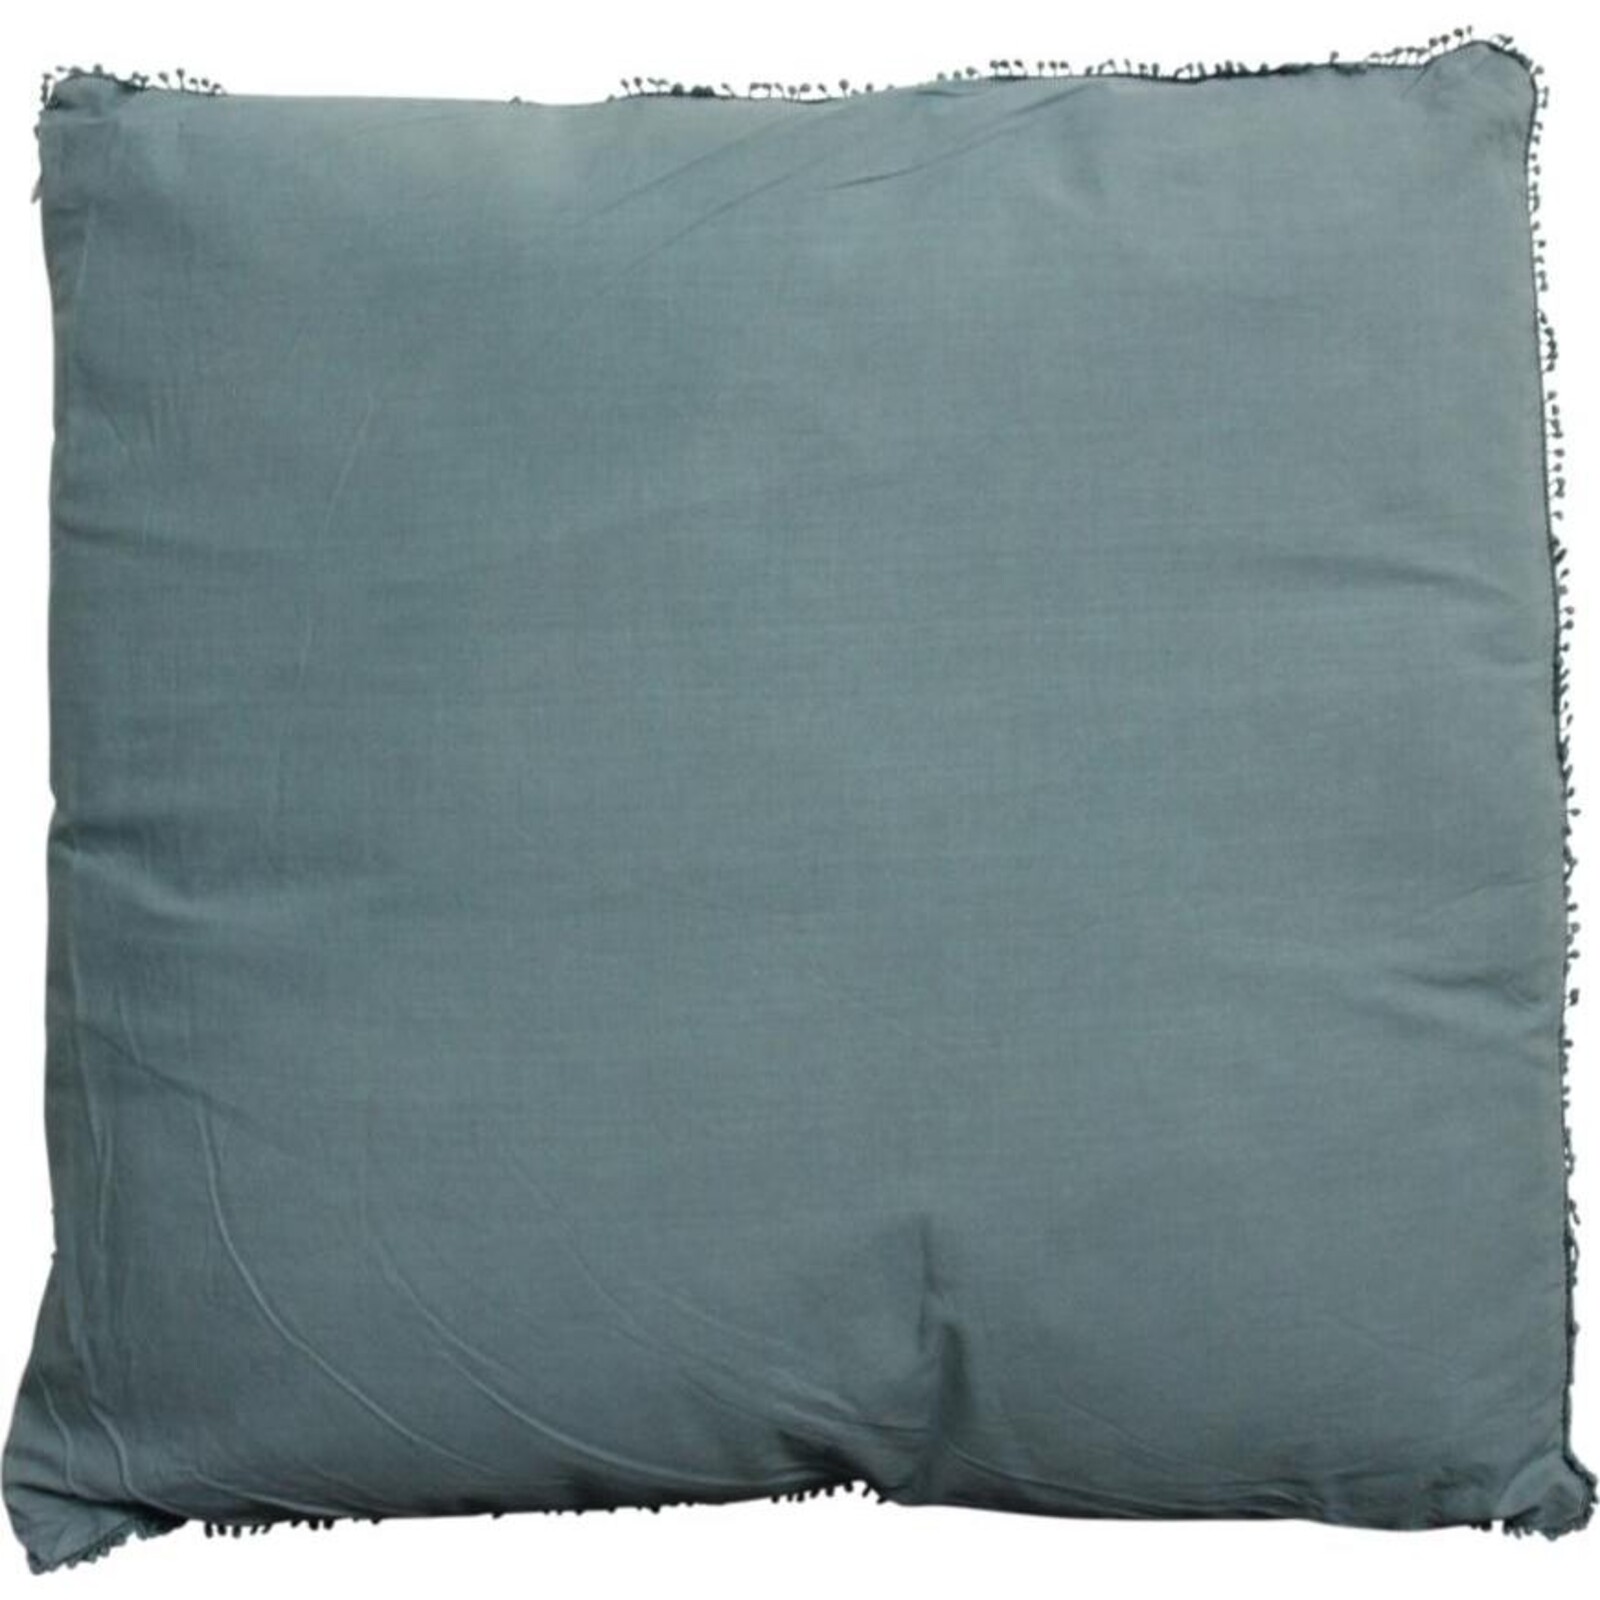 Cushion Stone Washed Linen w/ Bead Trim Teal